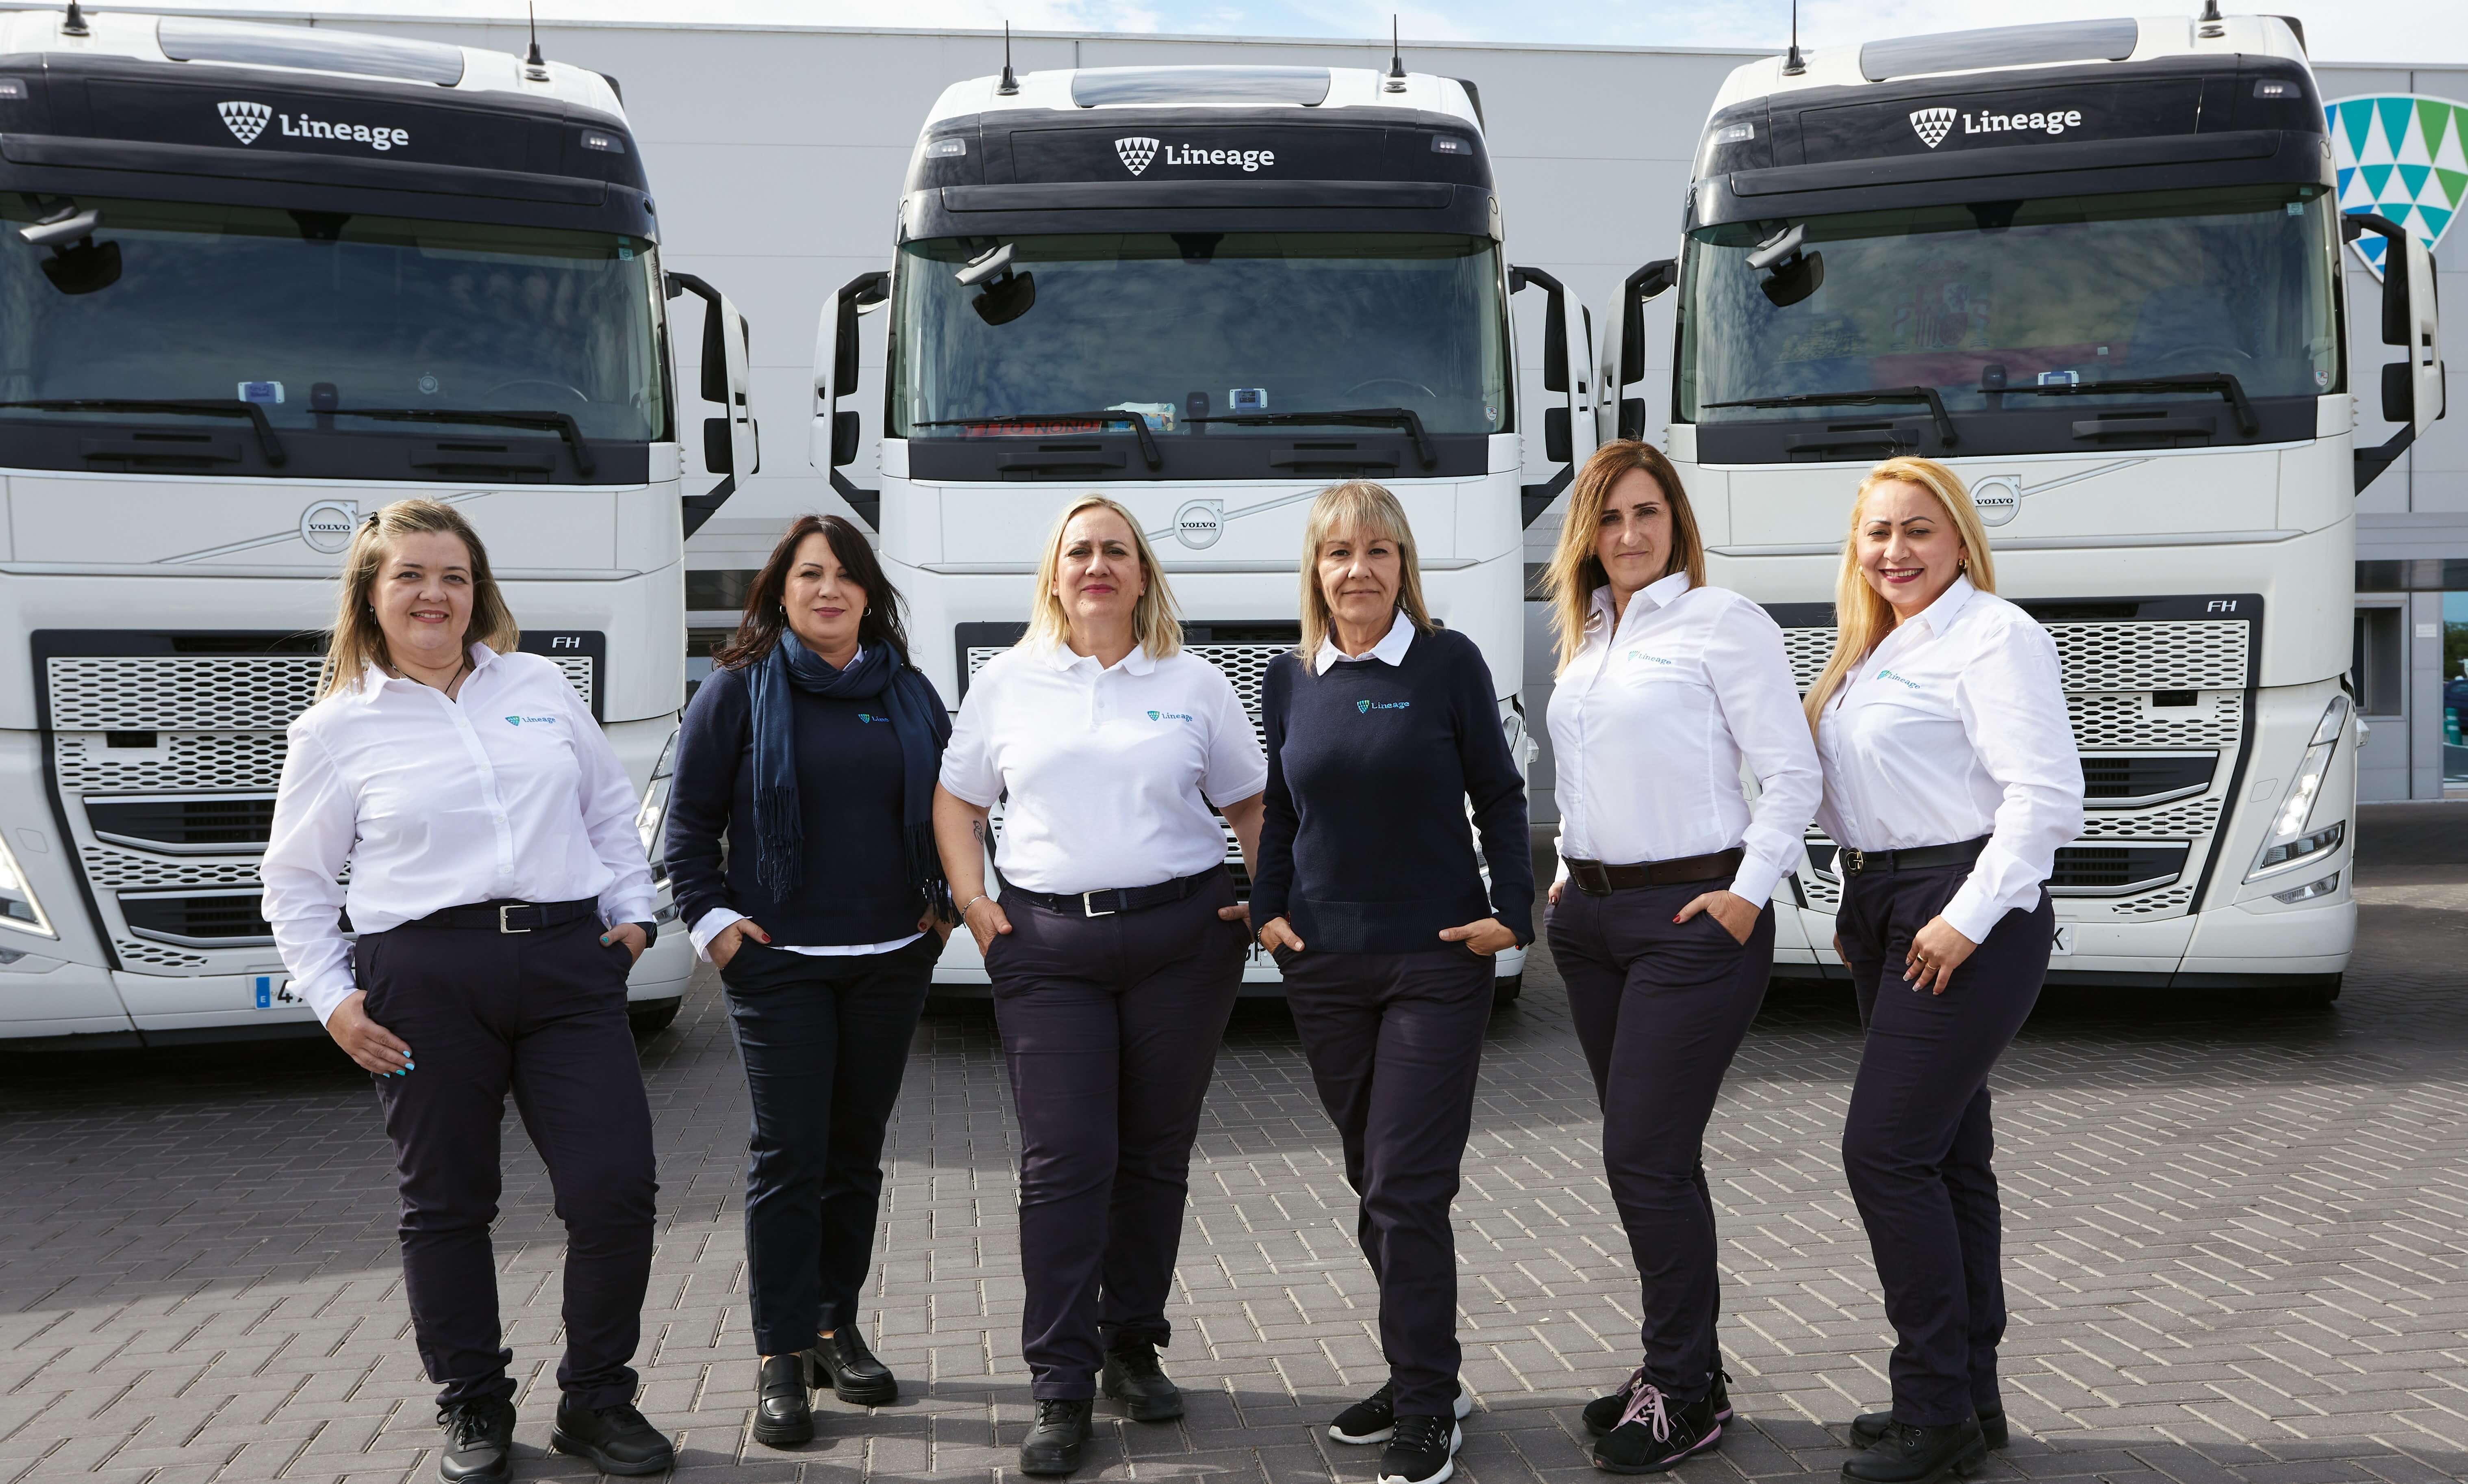 Five women drivers in white shirts and dark pants standing confidently in front of Lineage logistics trucks.